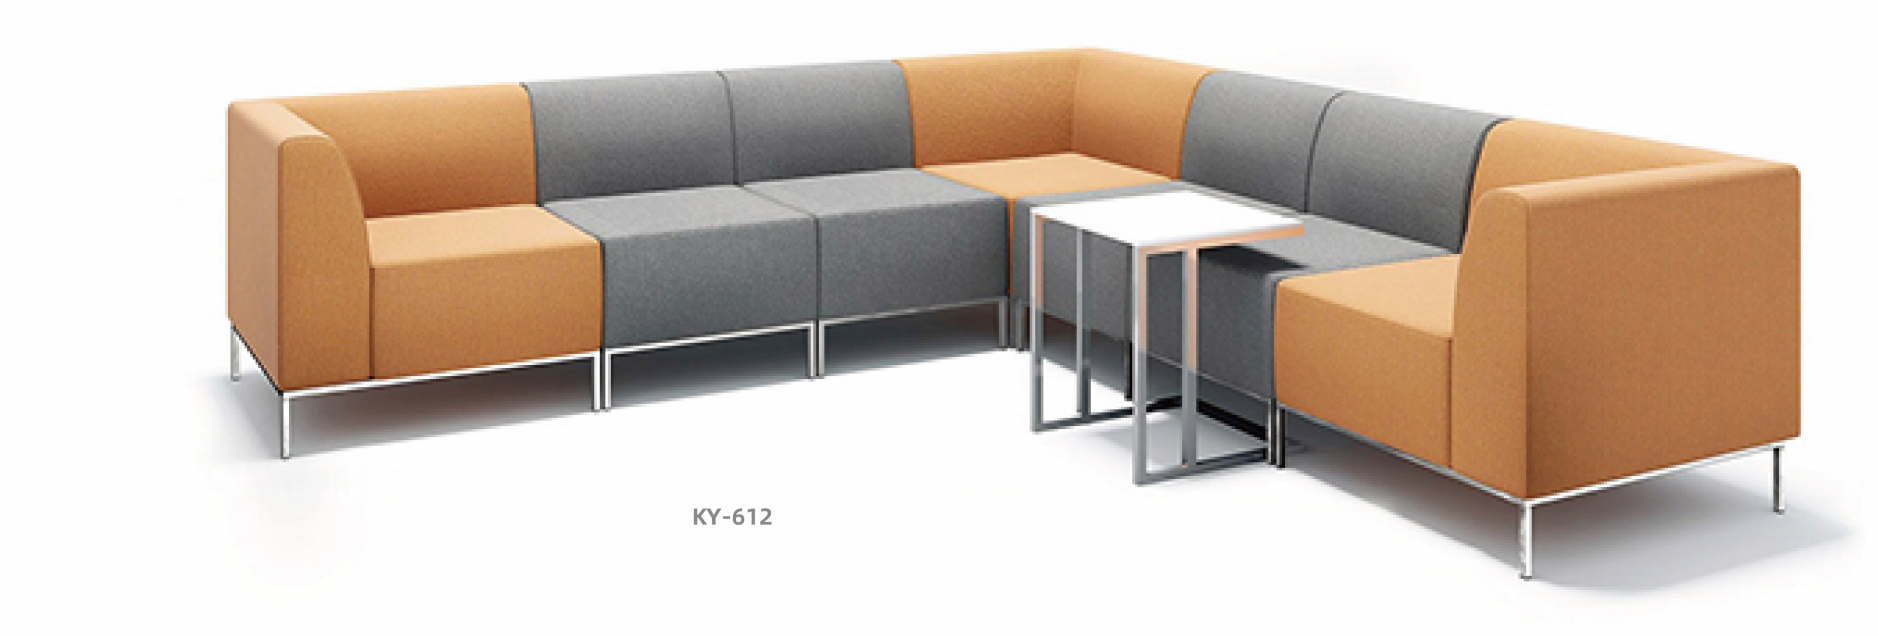 sofa set for office room 